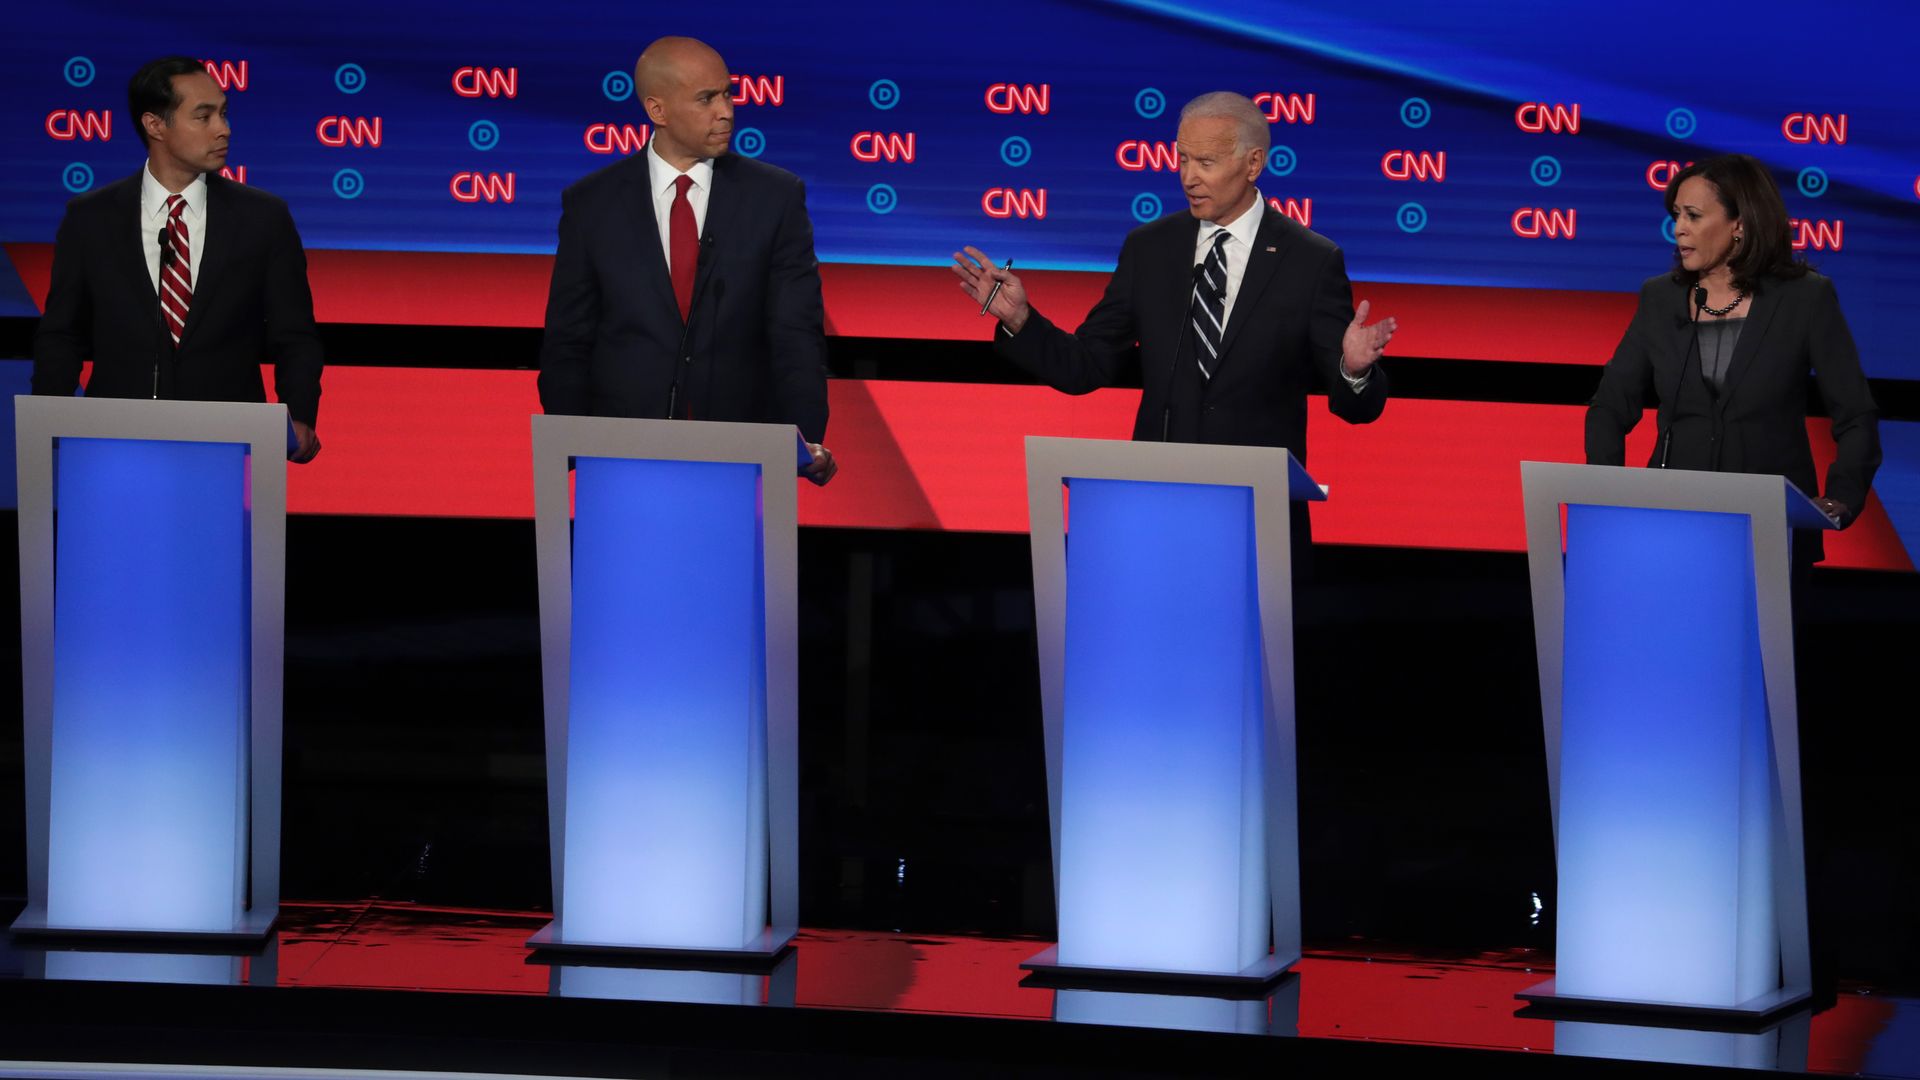 In this image, Castro, Booker, Biden, and Harris stand at podiums on the CNN stage on debate night.